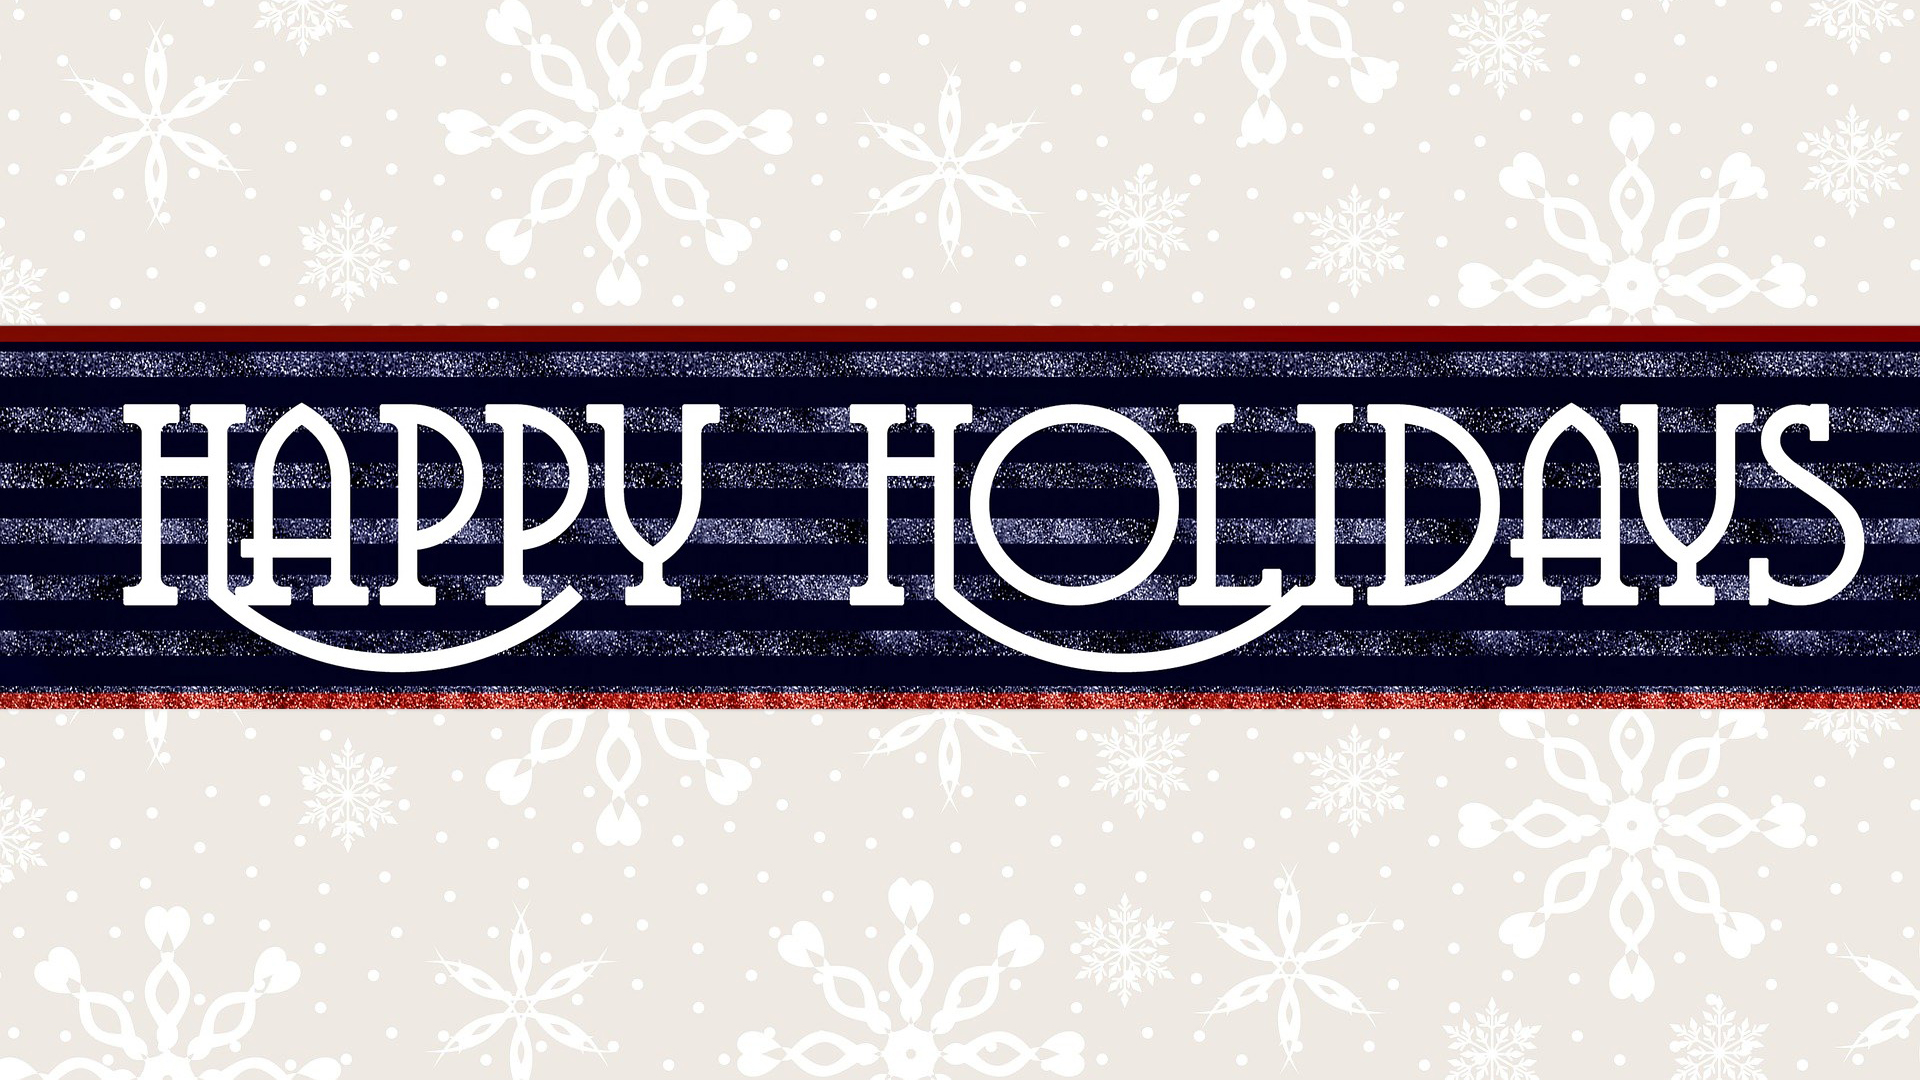 Shimmery Navy blue banner with a red outline and Happy Holidays written in the middle with a festive white all caps font. The background is tan with a white snowflake pattern.